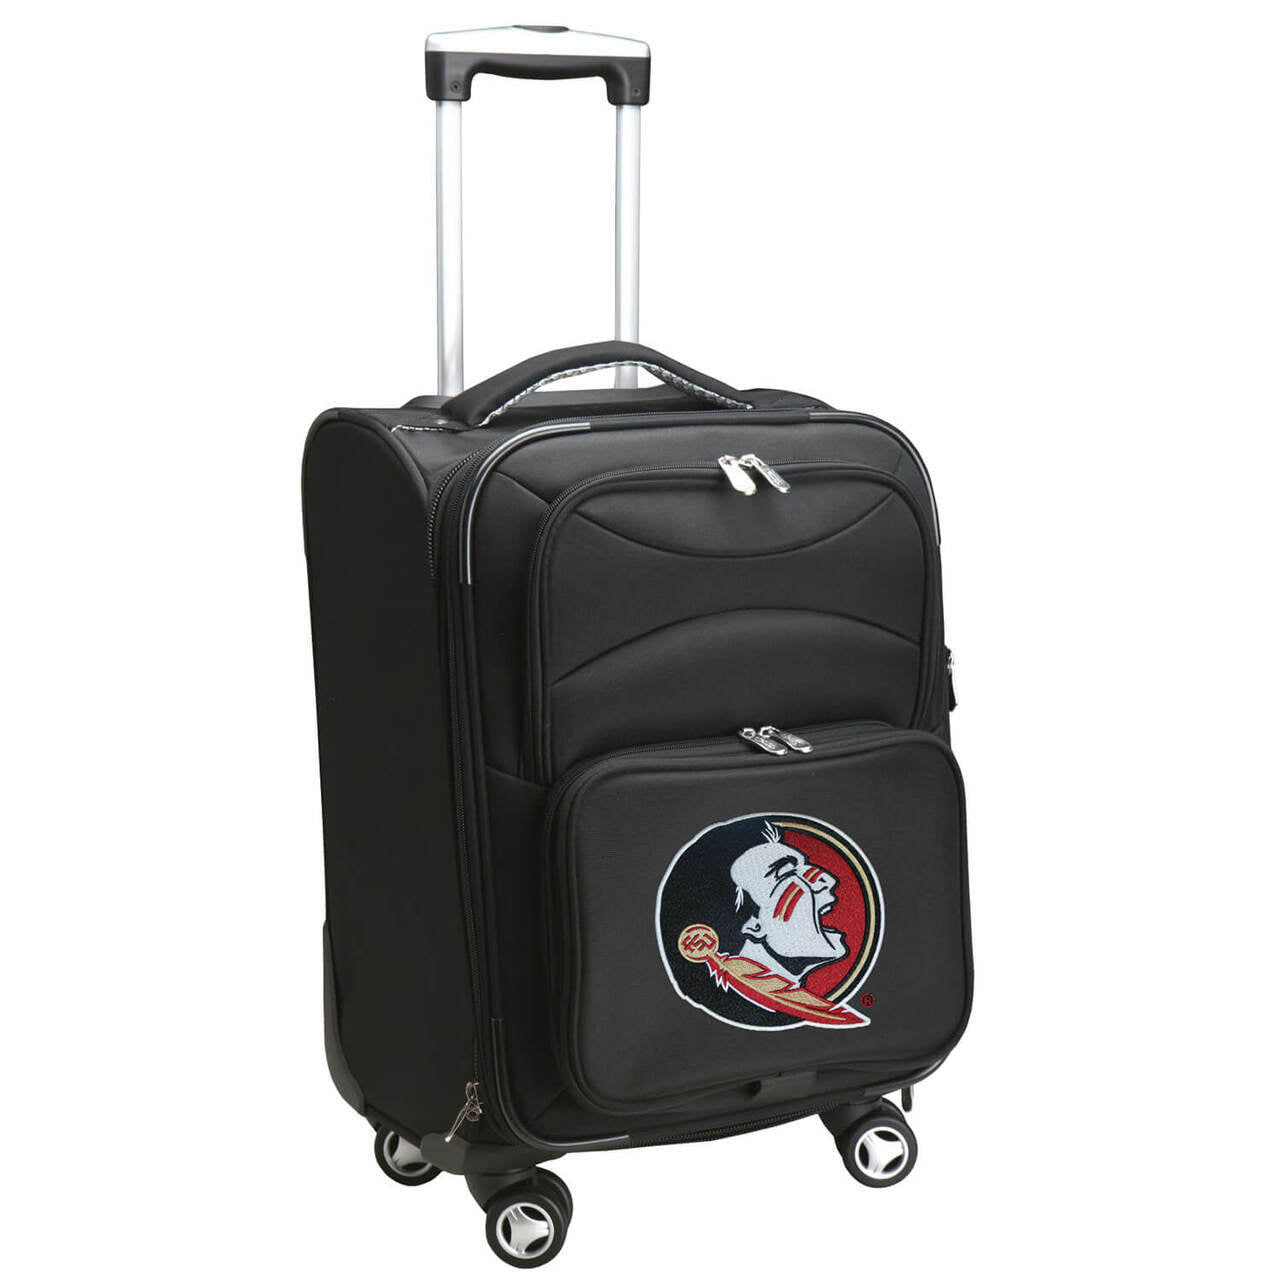 Florida State Seminoles 21" Carry-on Spinner Luggage